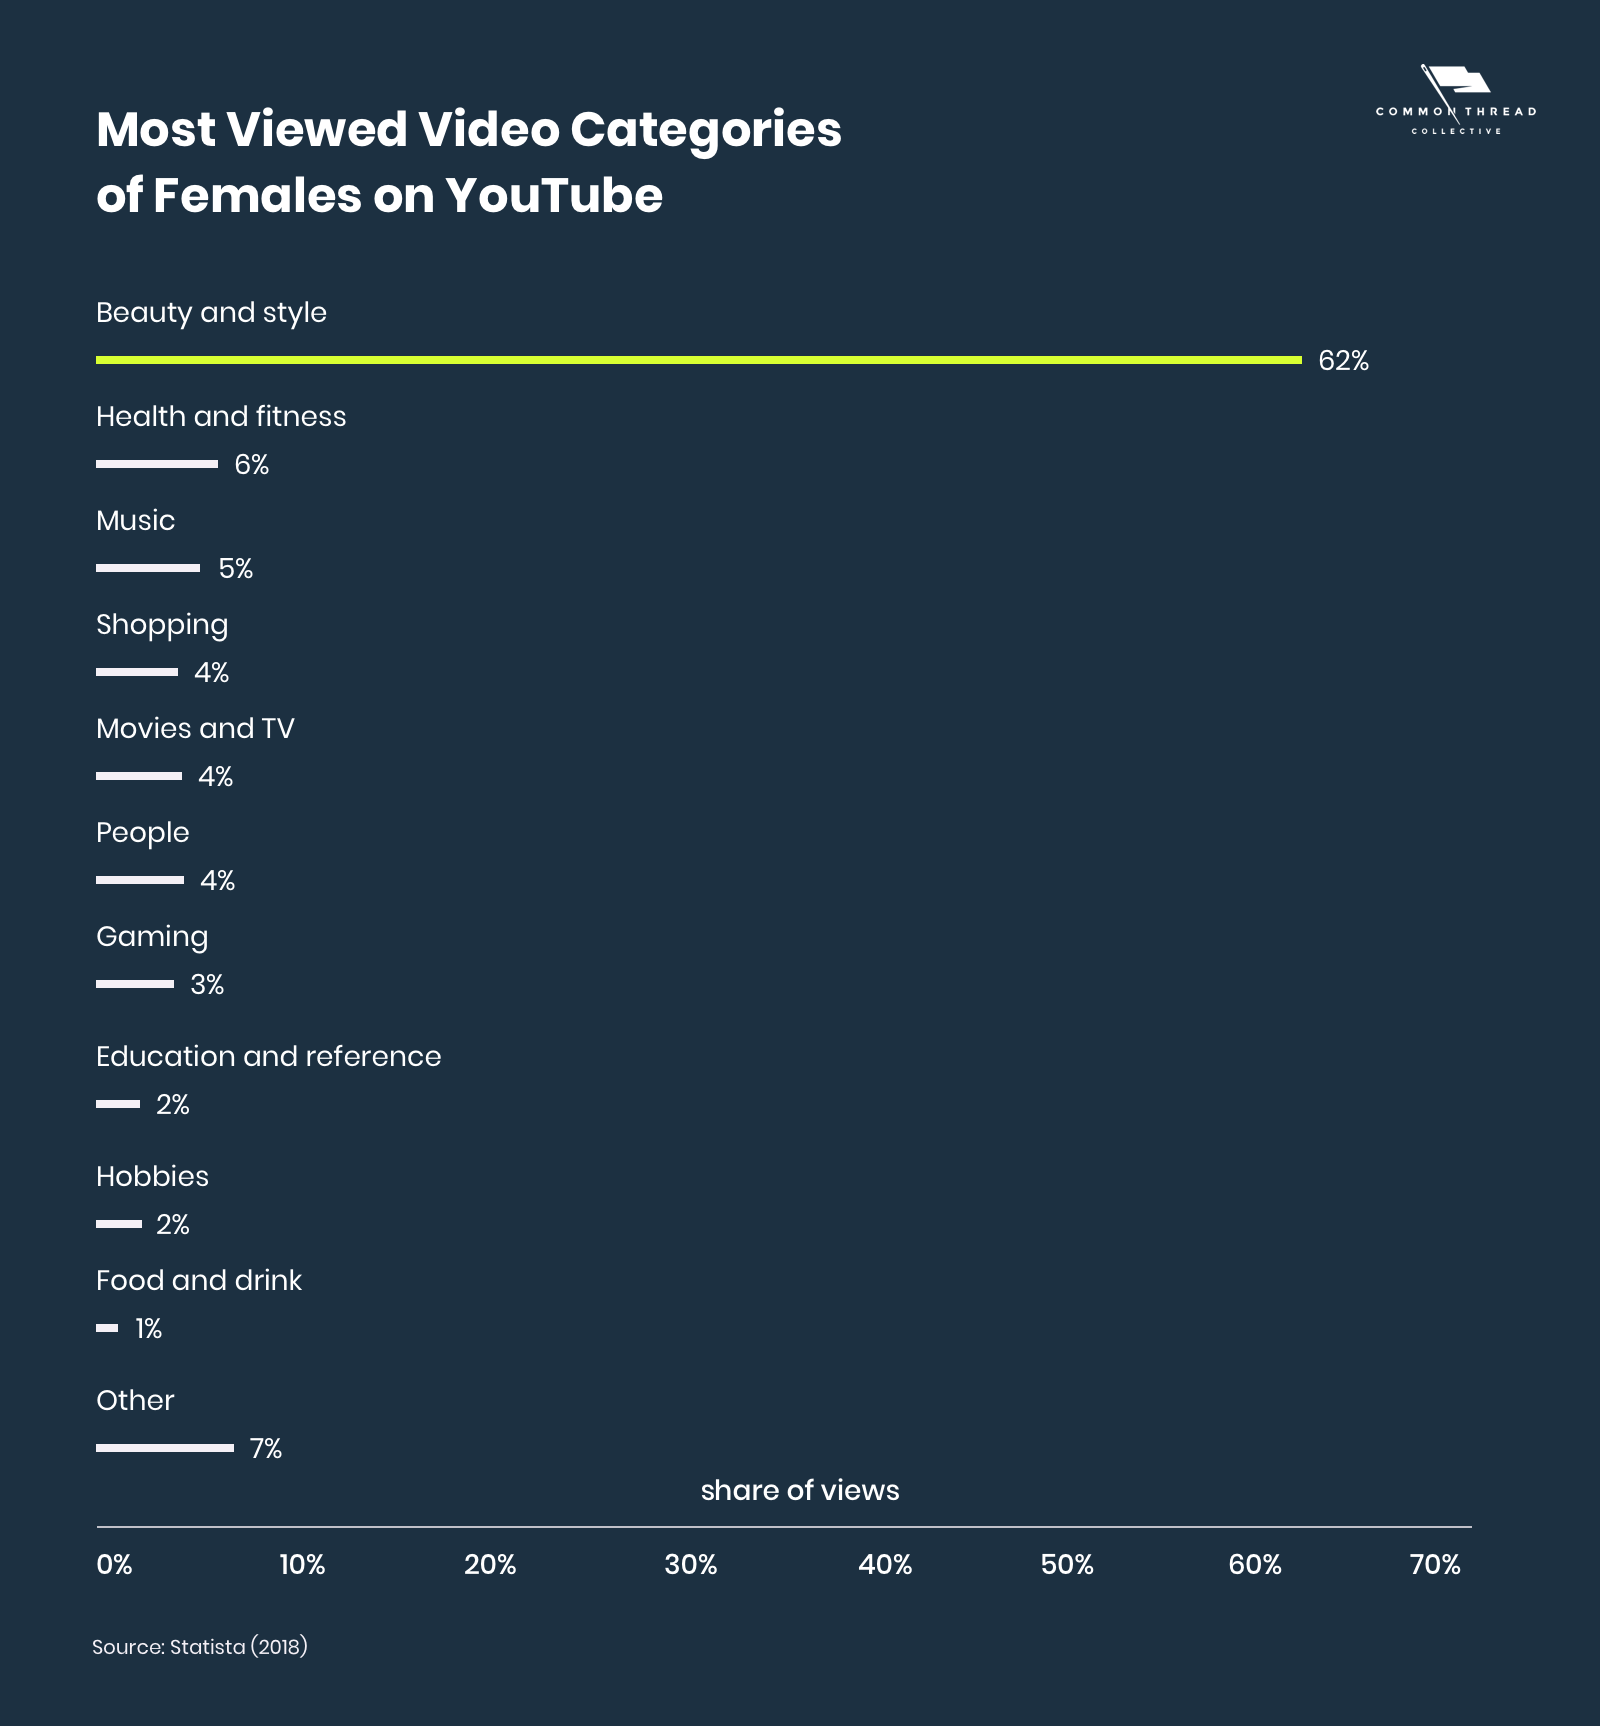 Most Viewed Video Categories of Females on YouTube